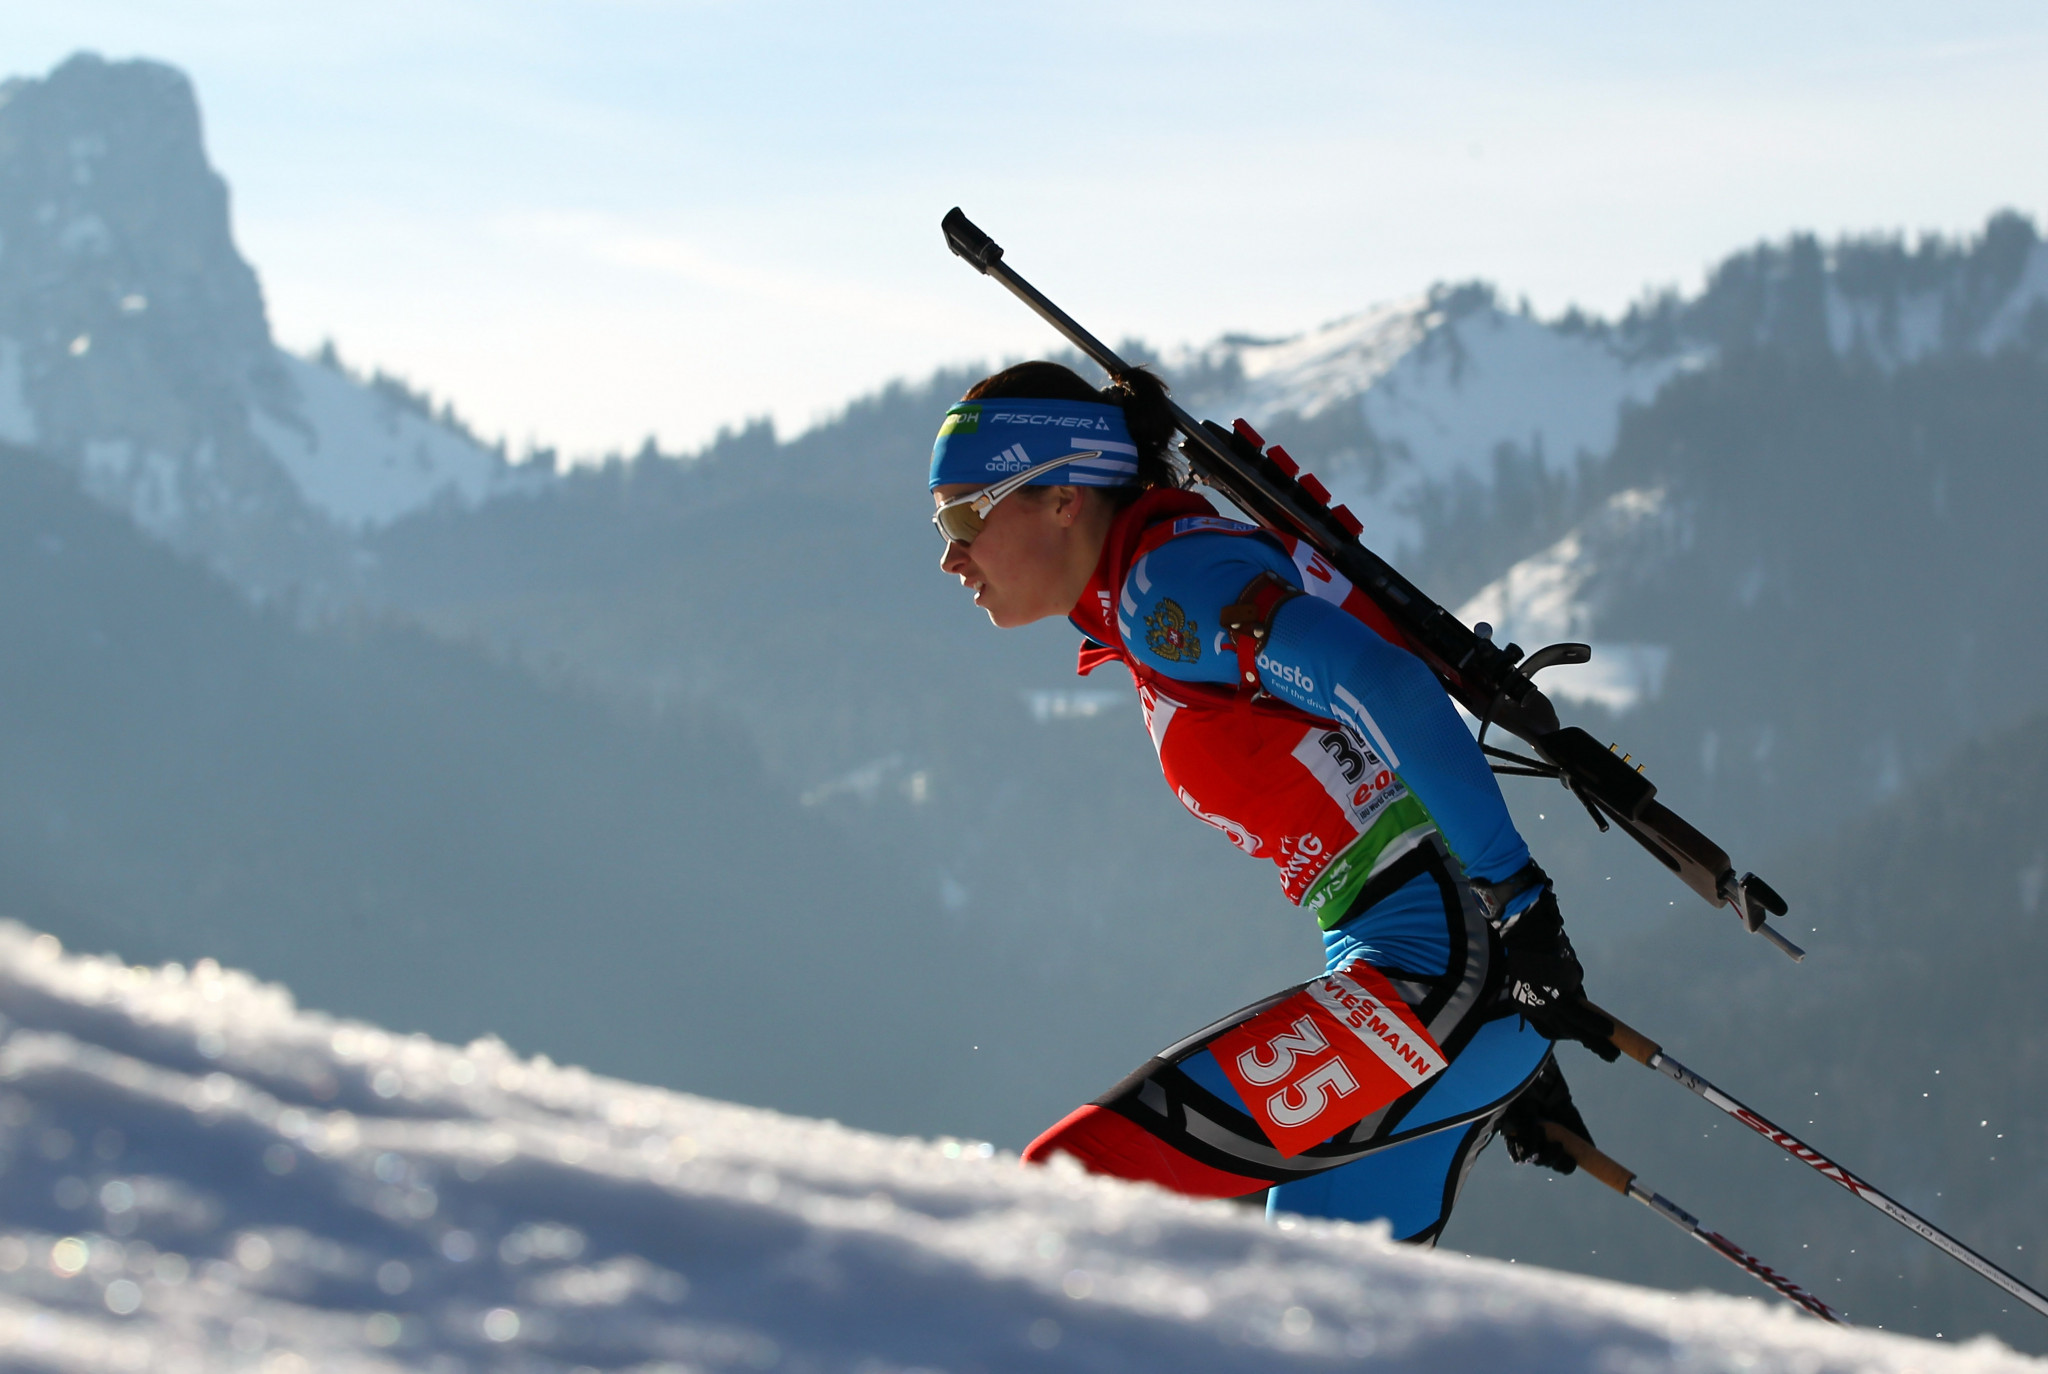 The Russian Biathlon Union remains a provisional IBU member following the doping scandal ©Getty Images